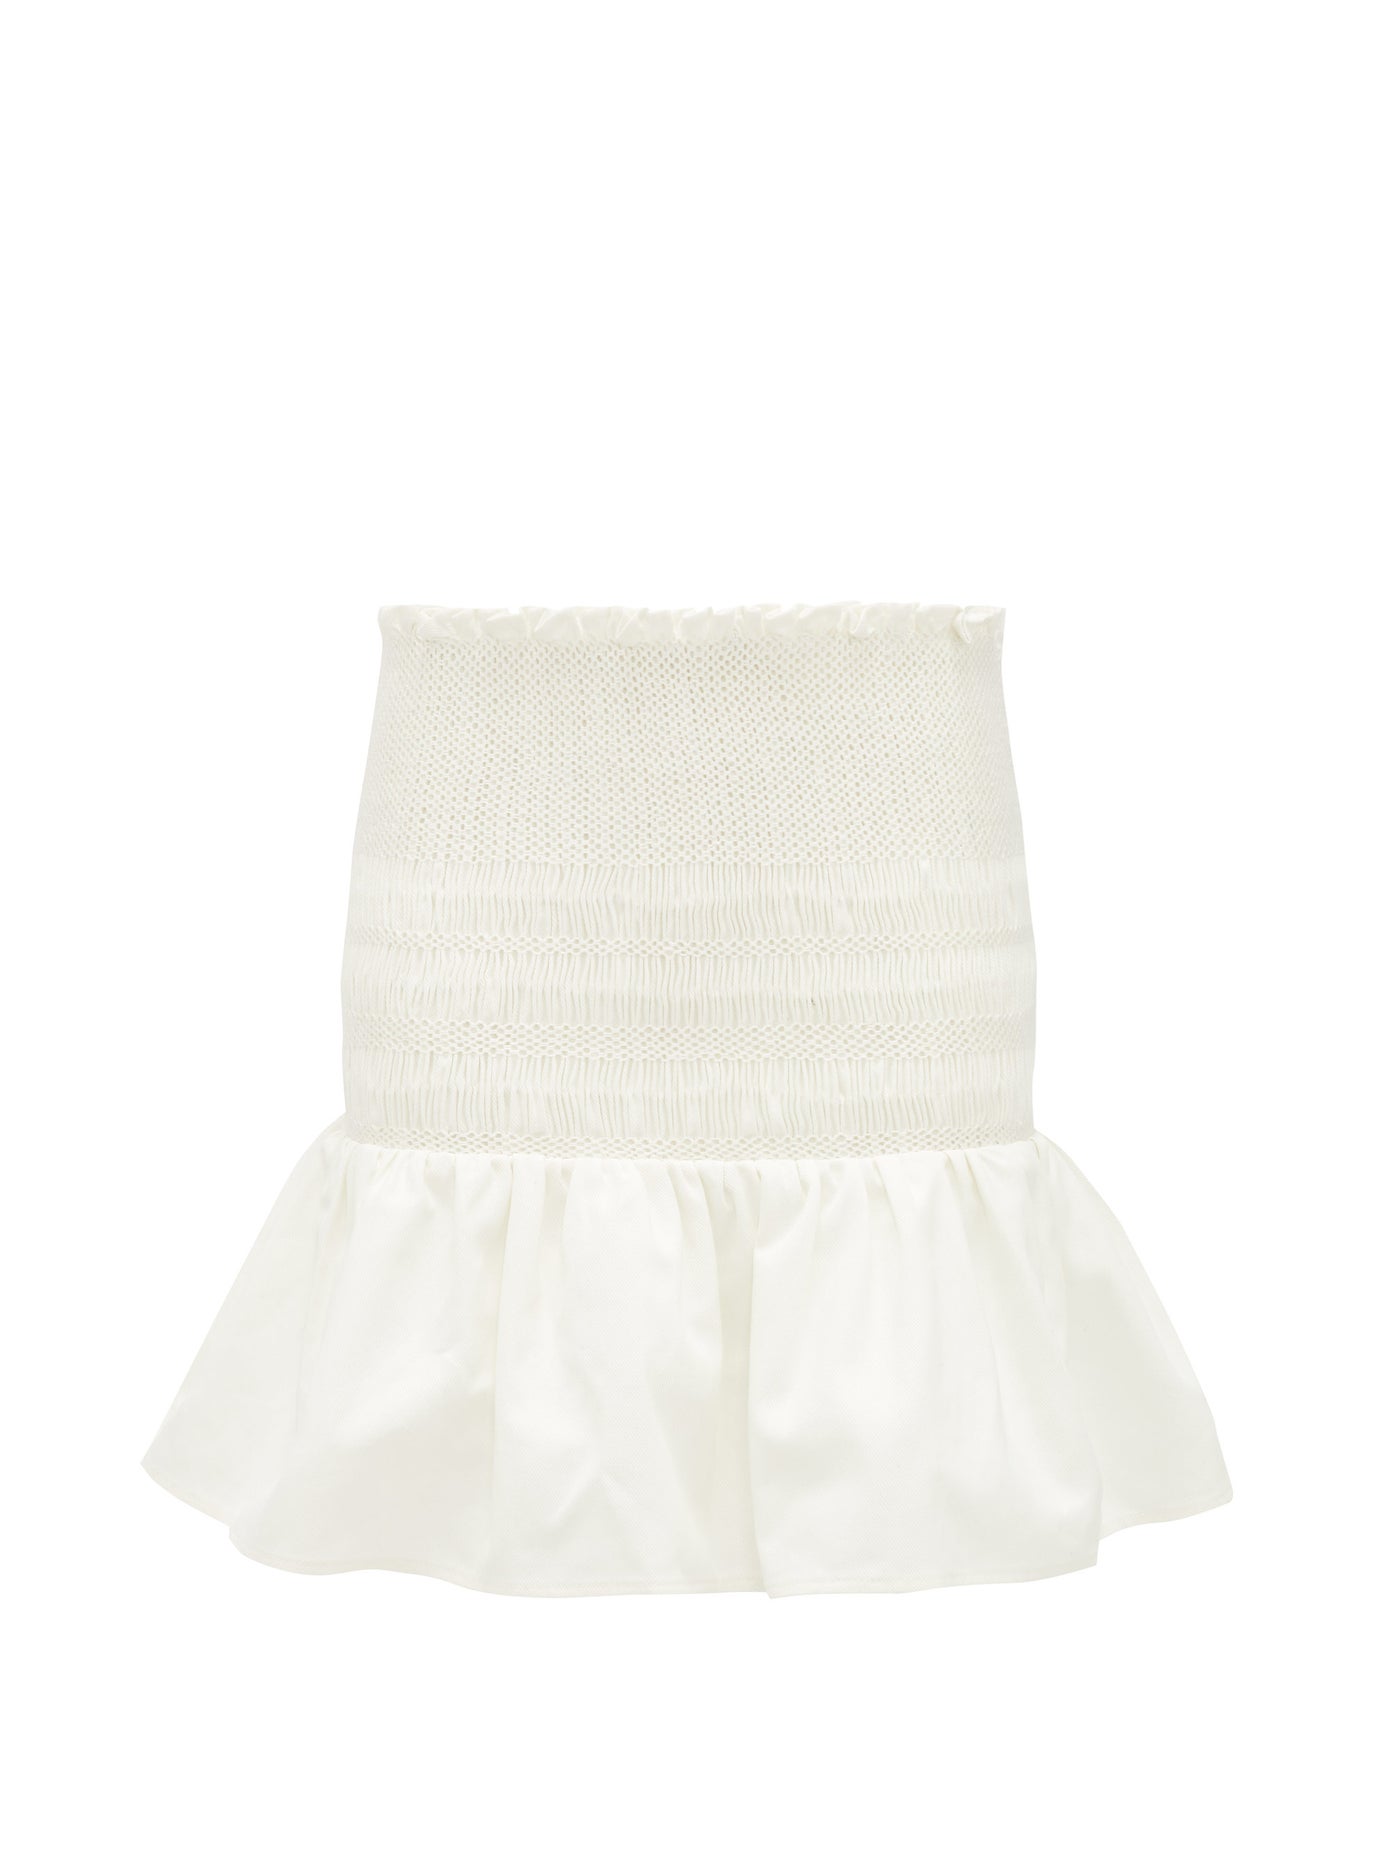 SIR - Arlo Smocked Cotton-Twill Mini Skirt | ABOUT ICONS